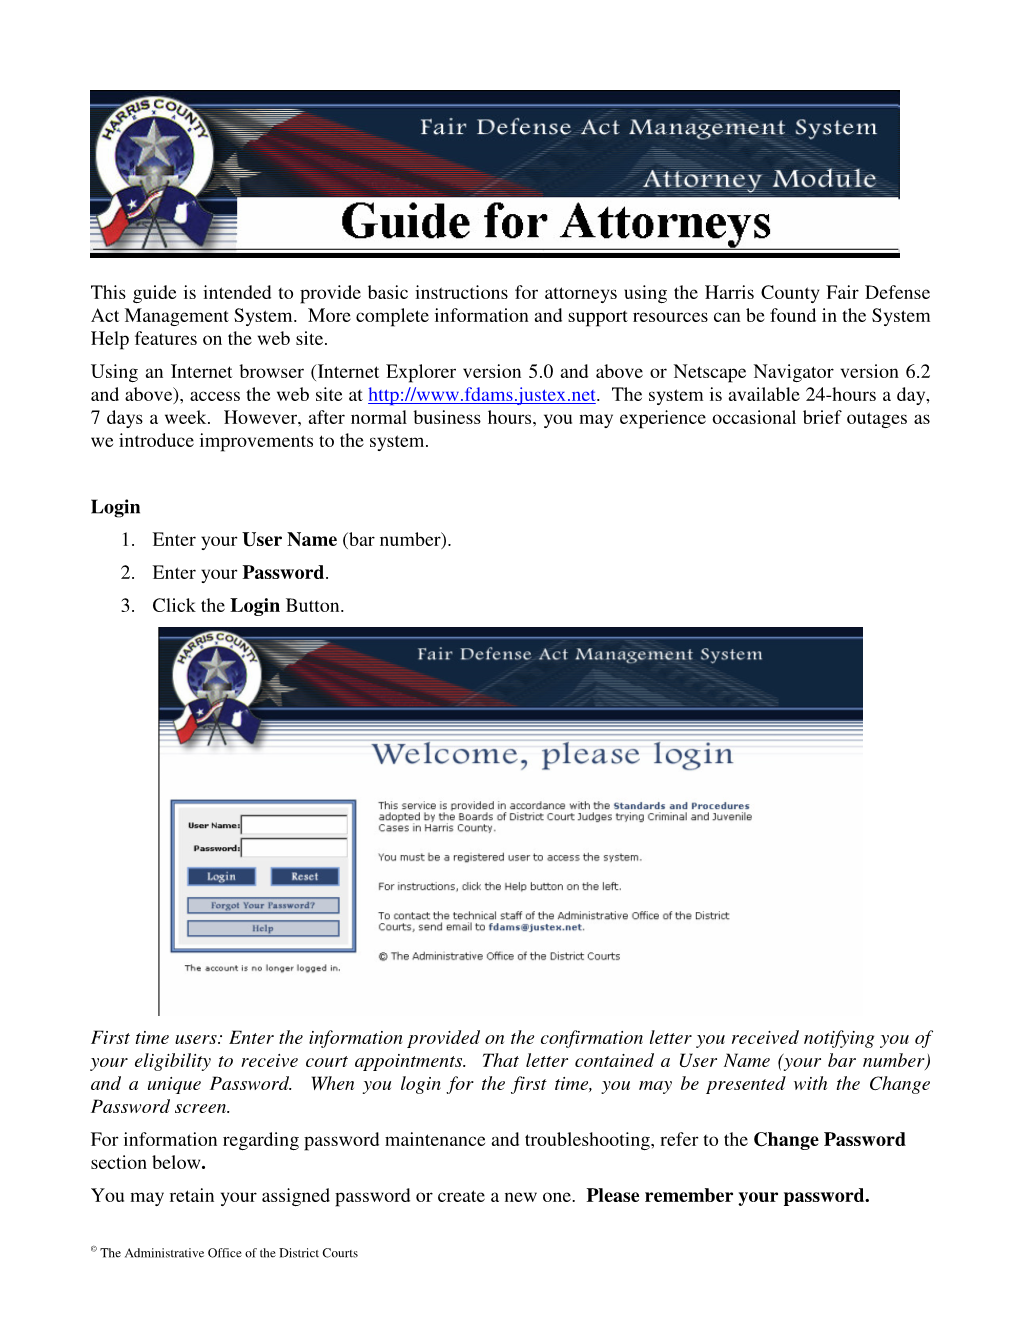 This Guide Is Intended to Provide Basic Instructions for Attorneys Using the Harris County Fair Defense Act Management System